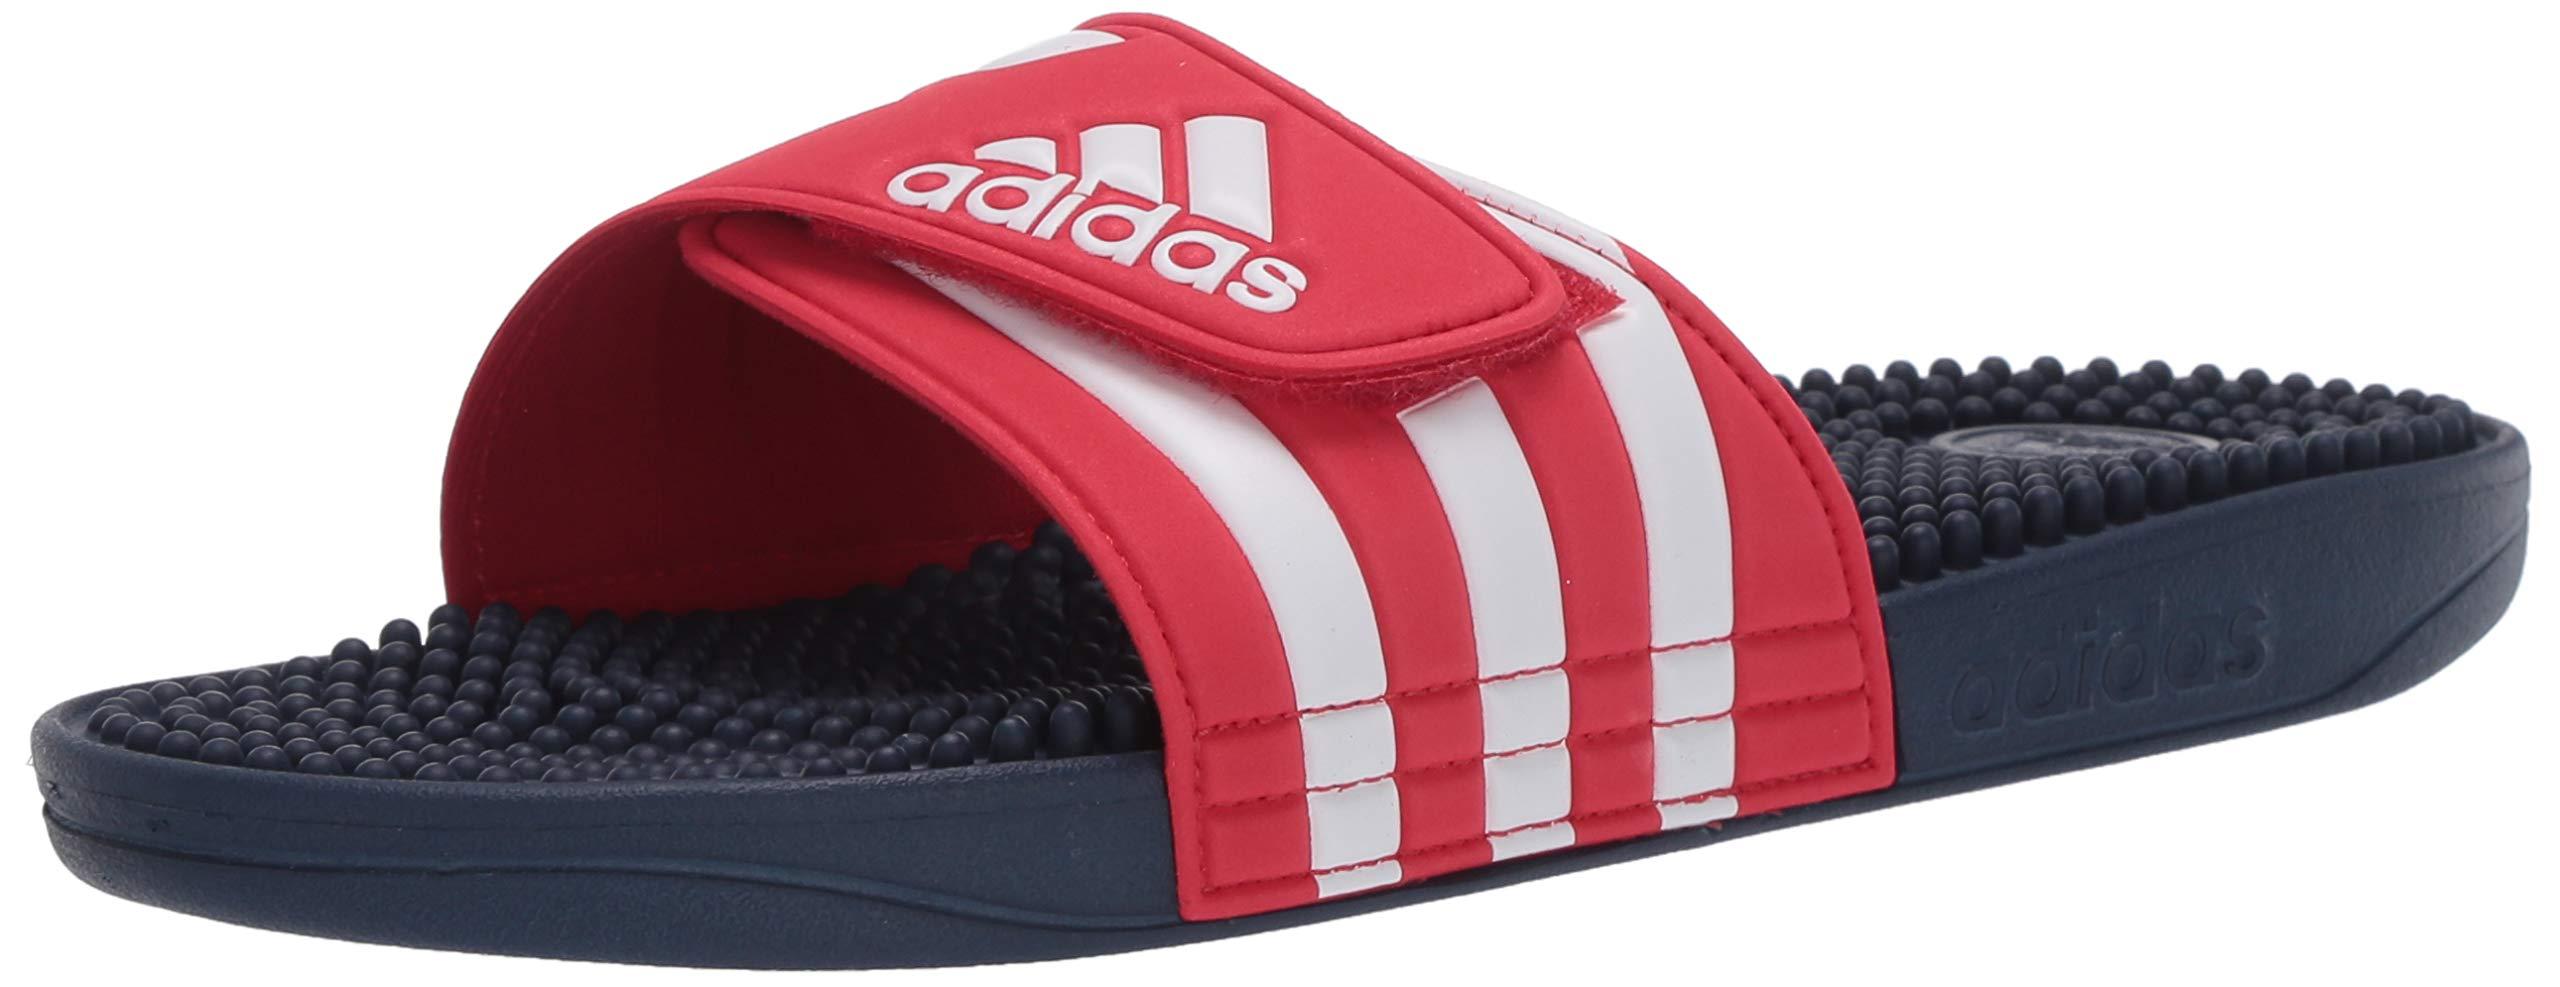 adidas 's Adissage Slide Sandal in Red | Lyst